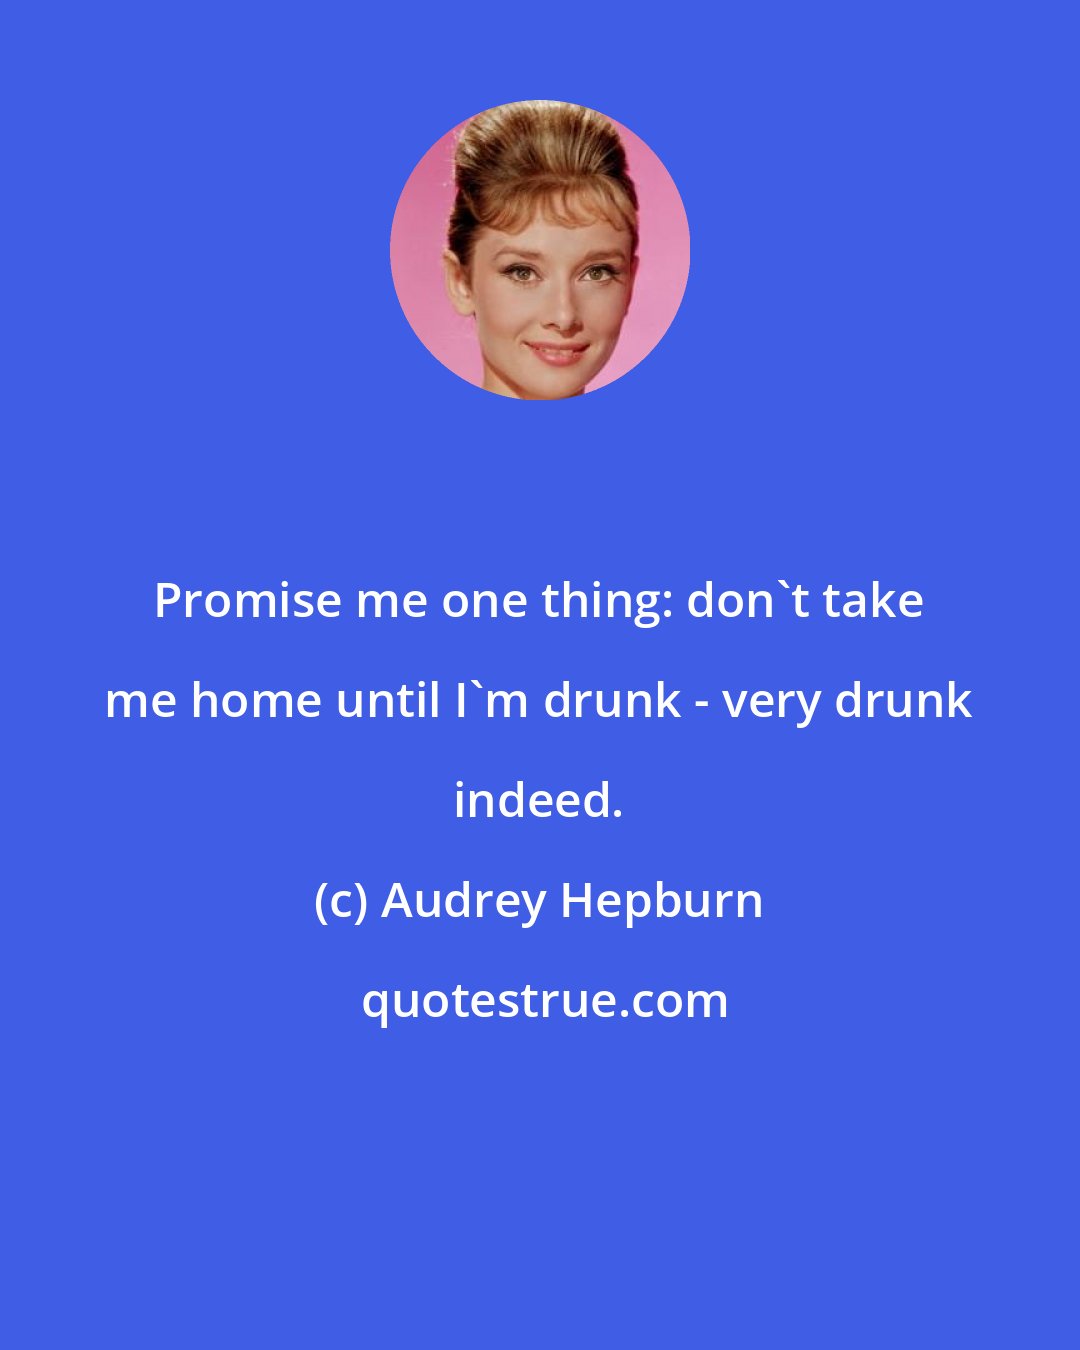 Audrey Hepburn: Promise me one thing: don't take me home until I'm drunk - very drunk indeed.